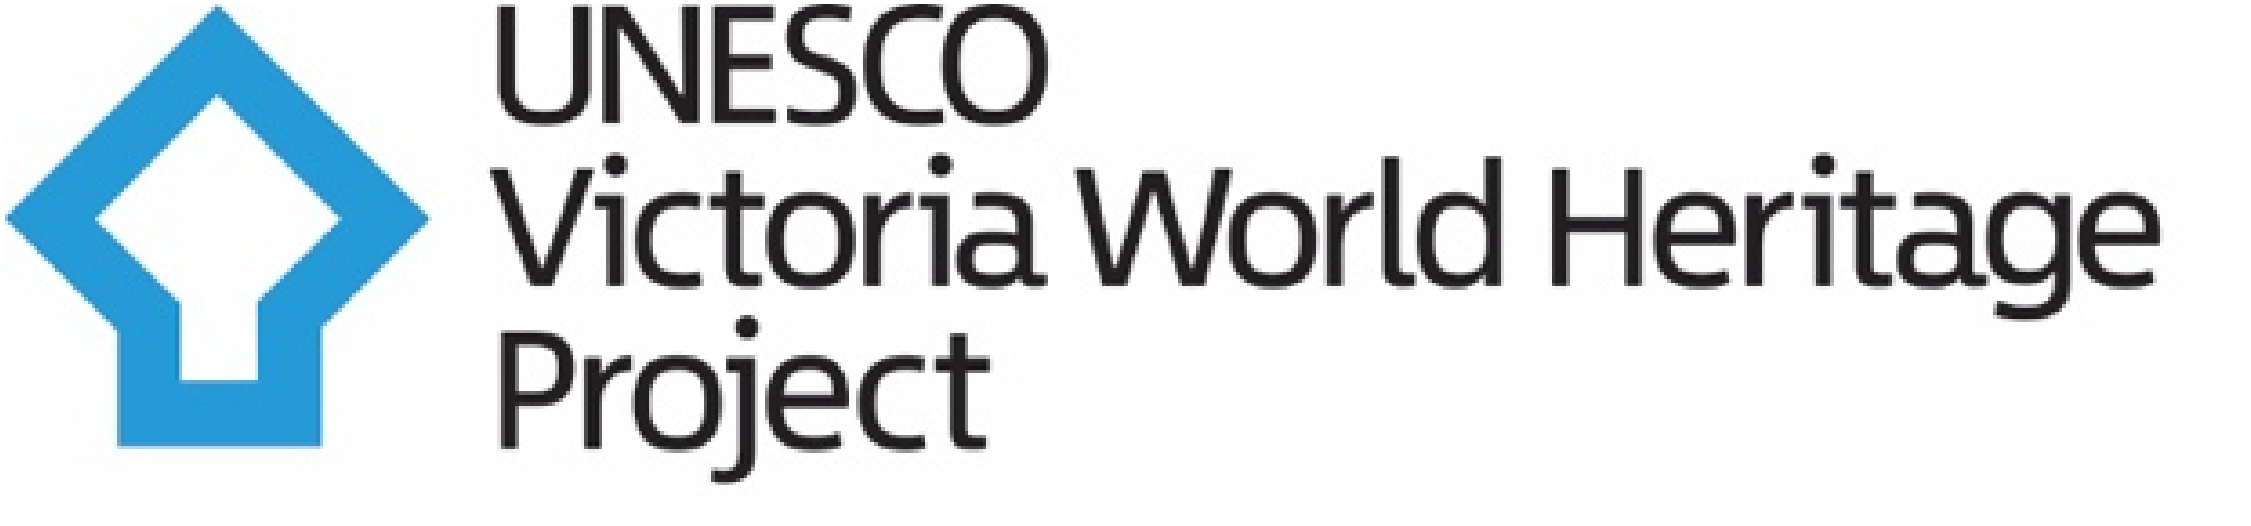 The Victoria World Heritage Project